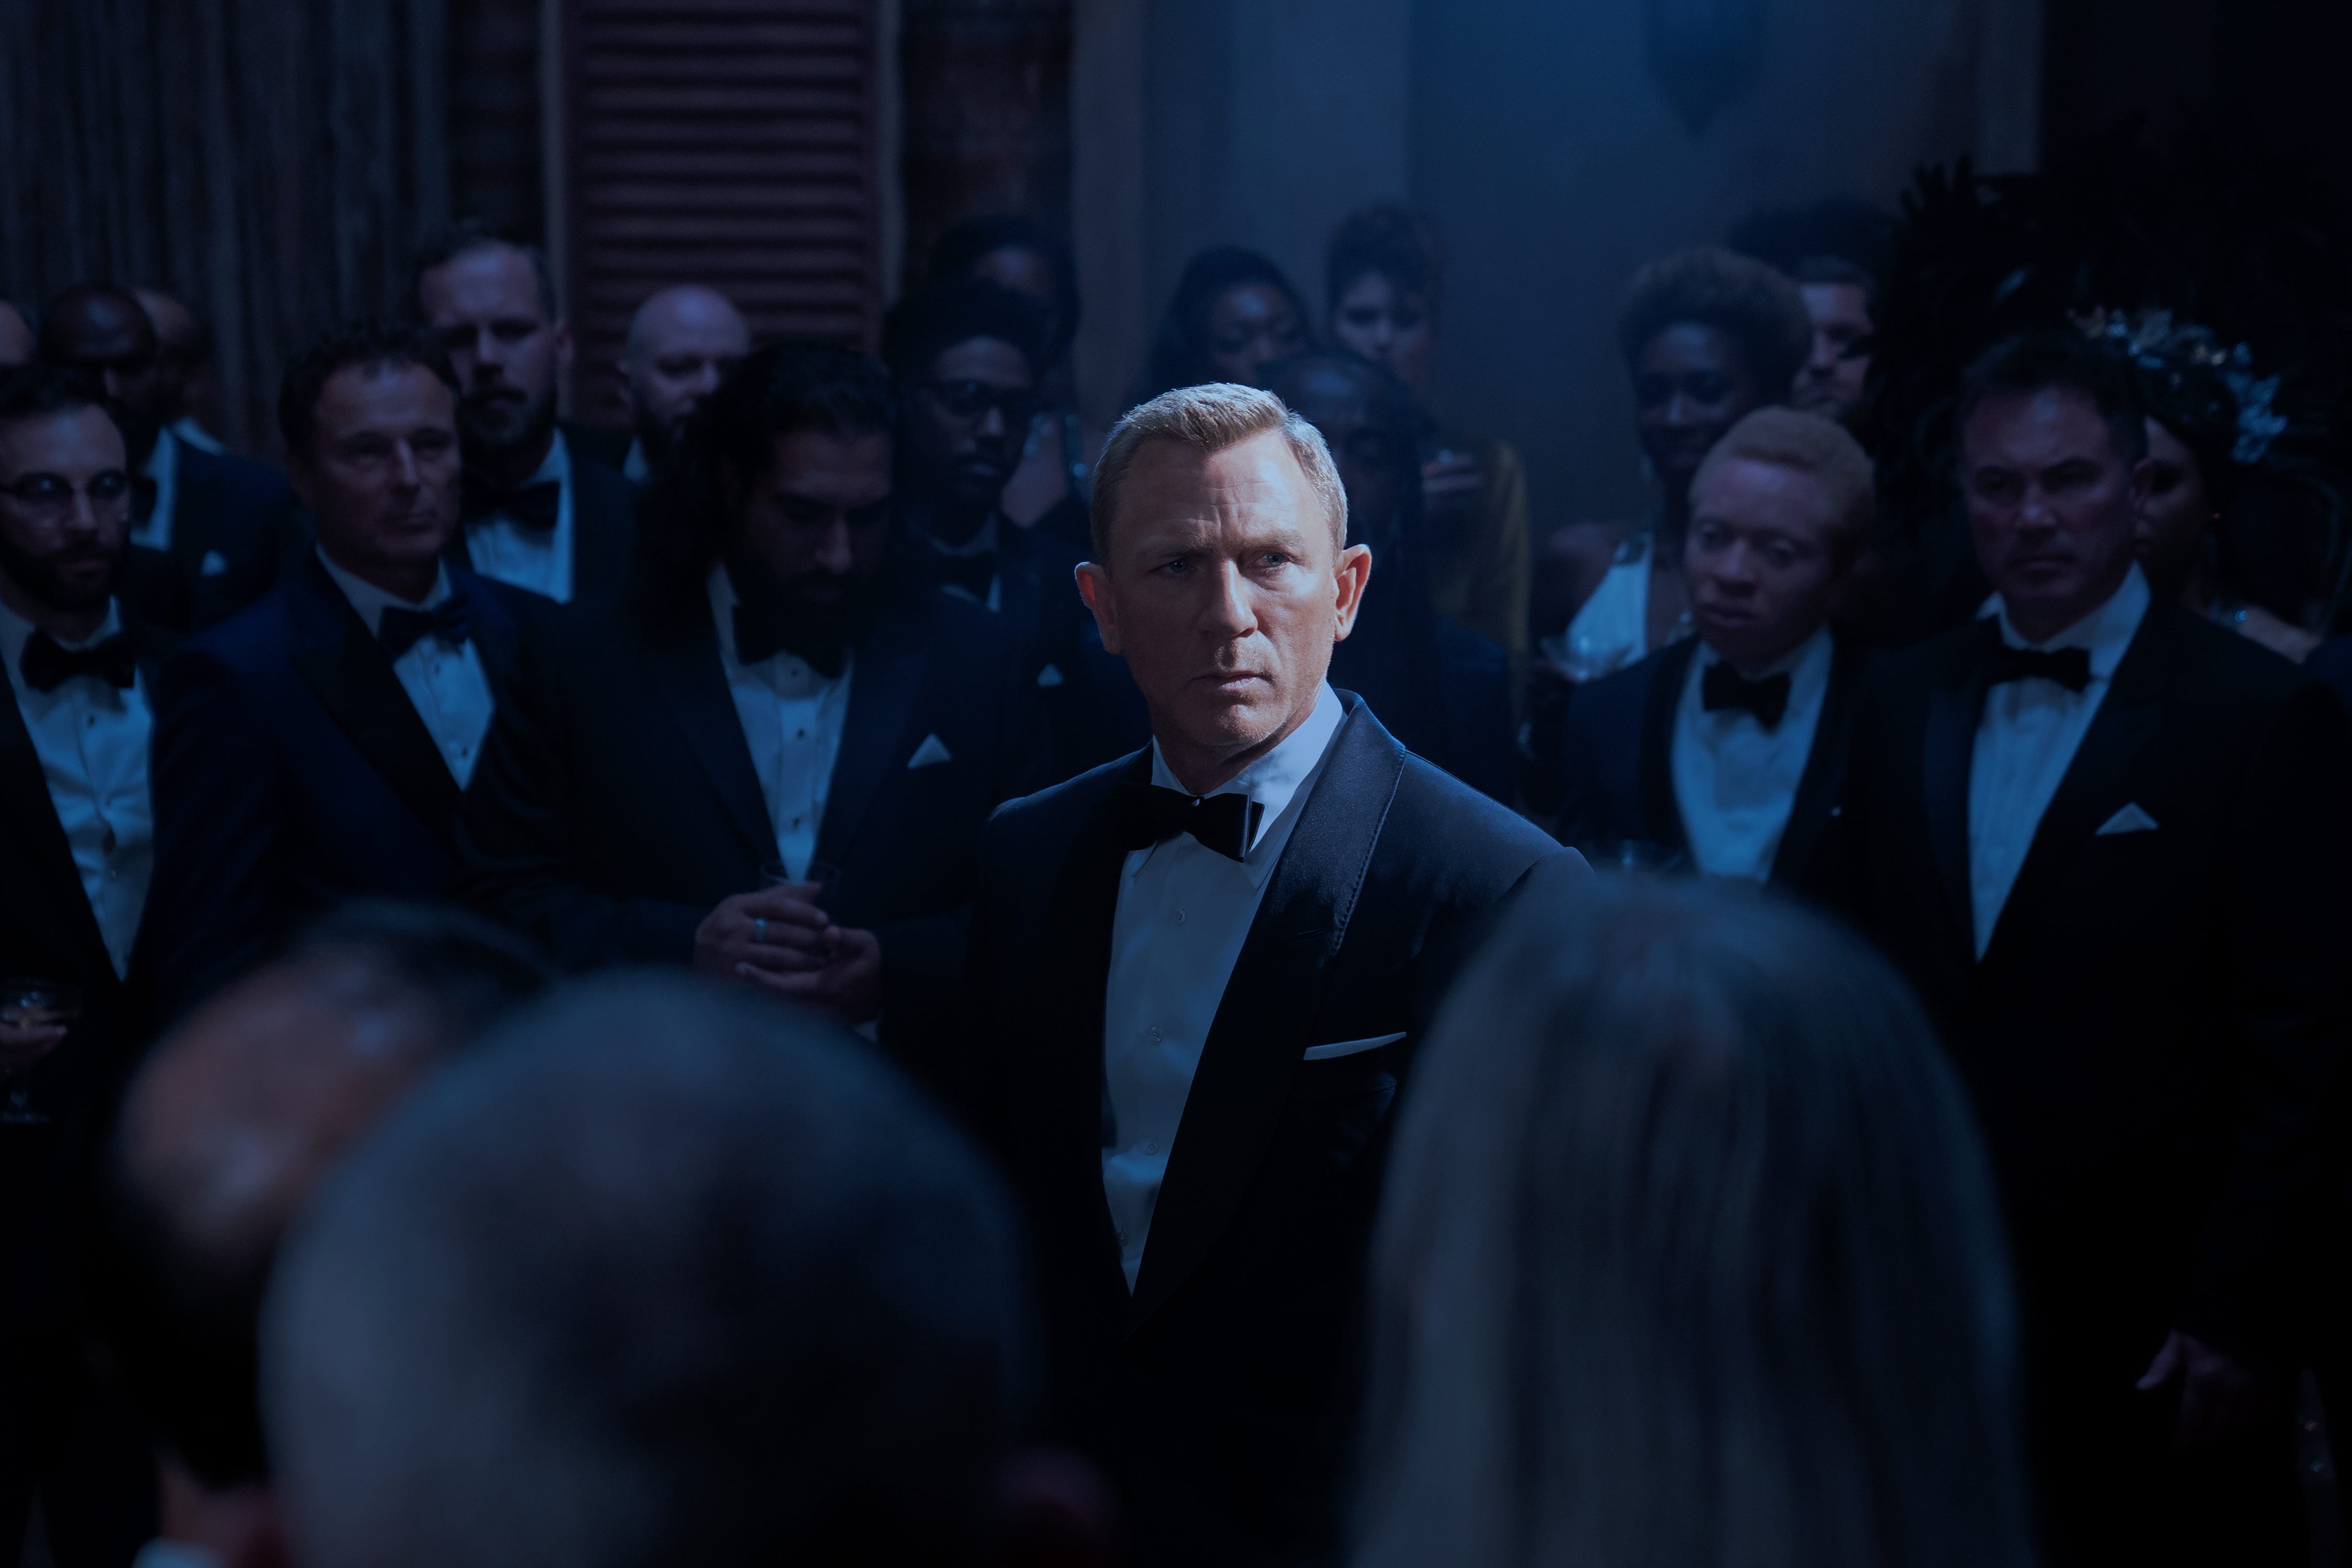 No Time to Die finishes Daniel Craigs time as 007 in style